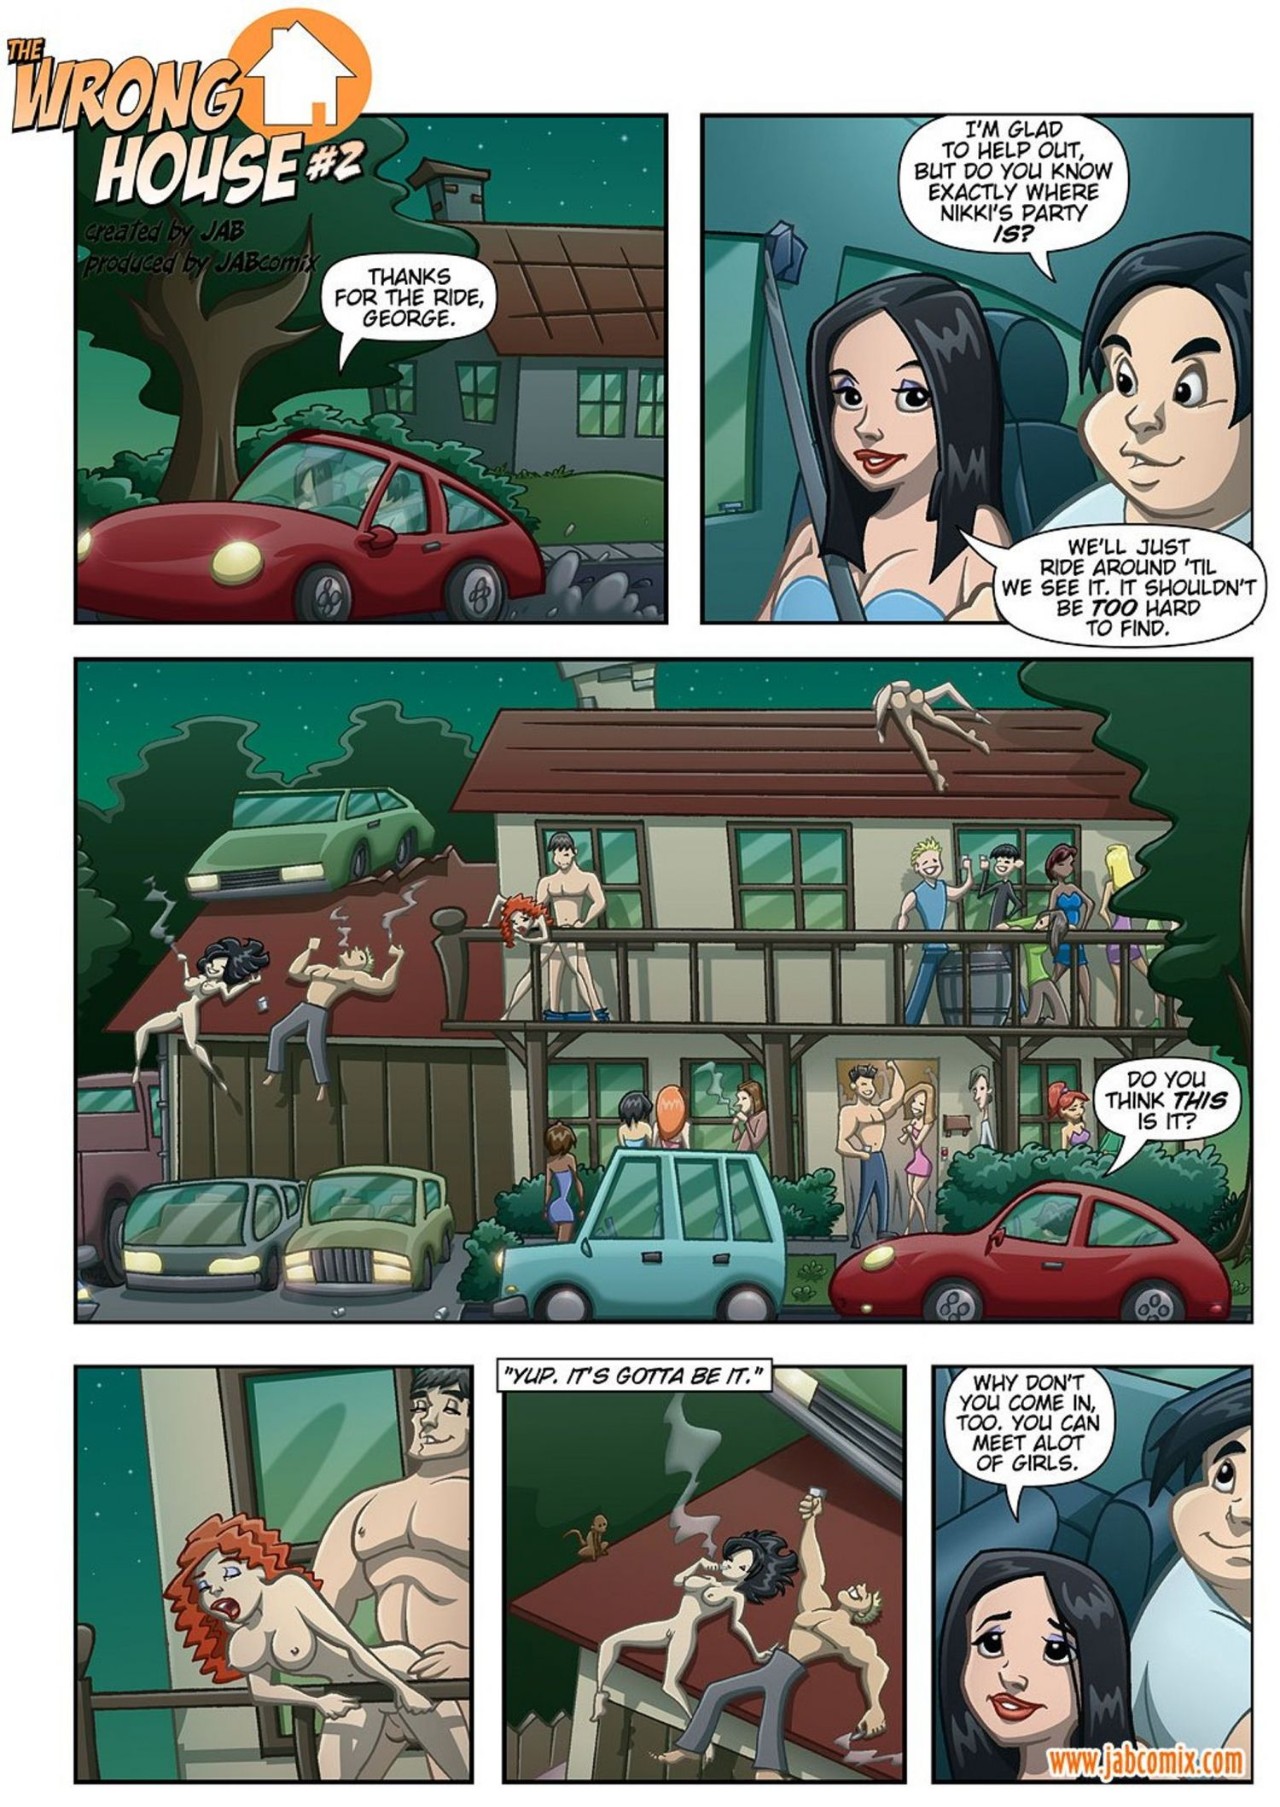 The Wrong House Part 2 Porn Comic english 01